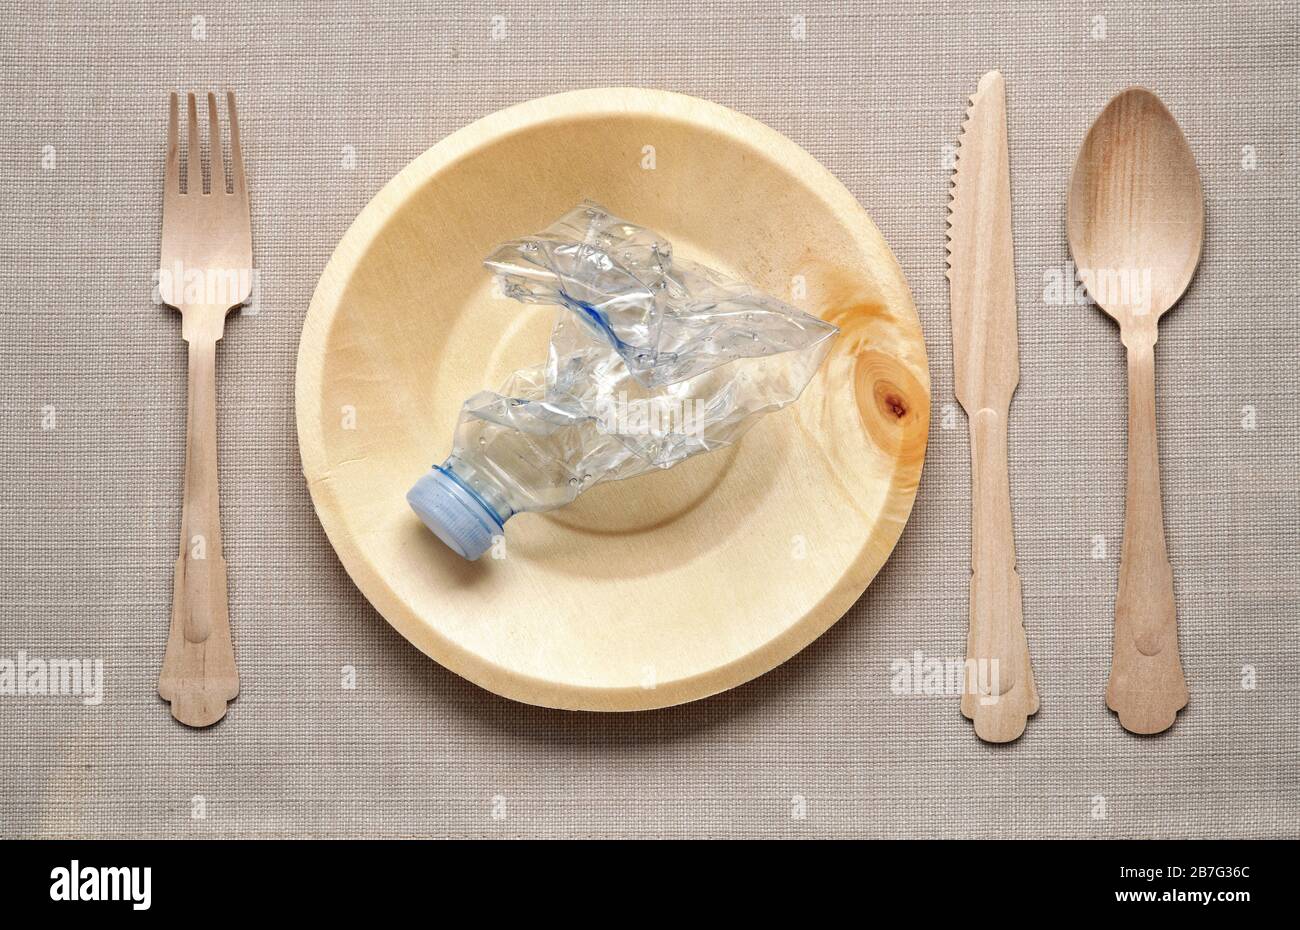 Eating plastic concept with table setting and a crumpled plastic bottle on a natural wood plate flanked by matching knife, fork and spoon viewed from Stock Photo